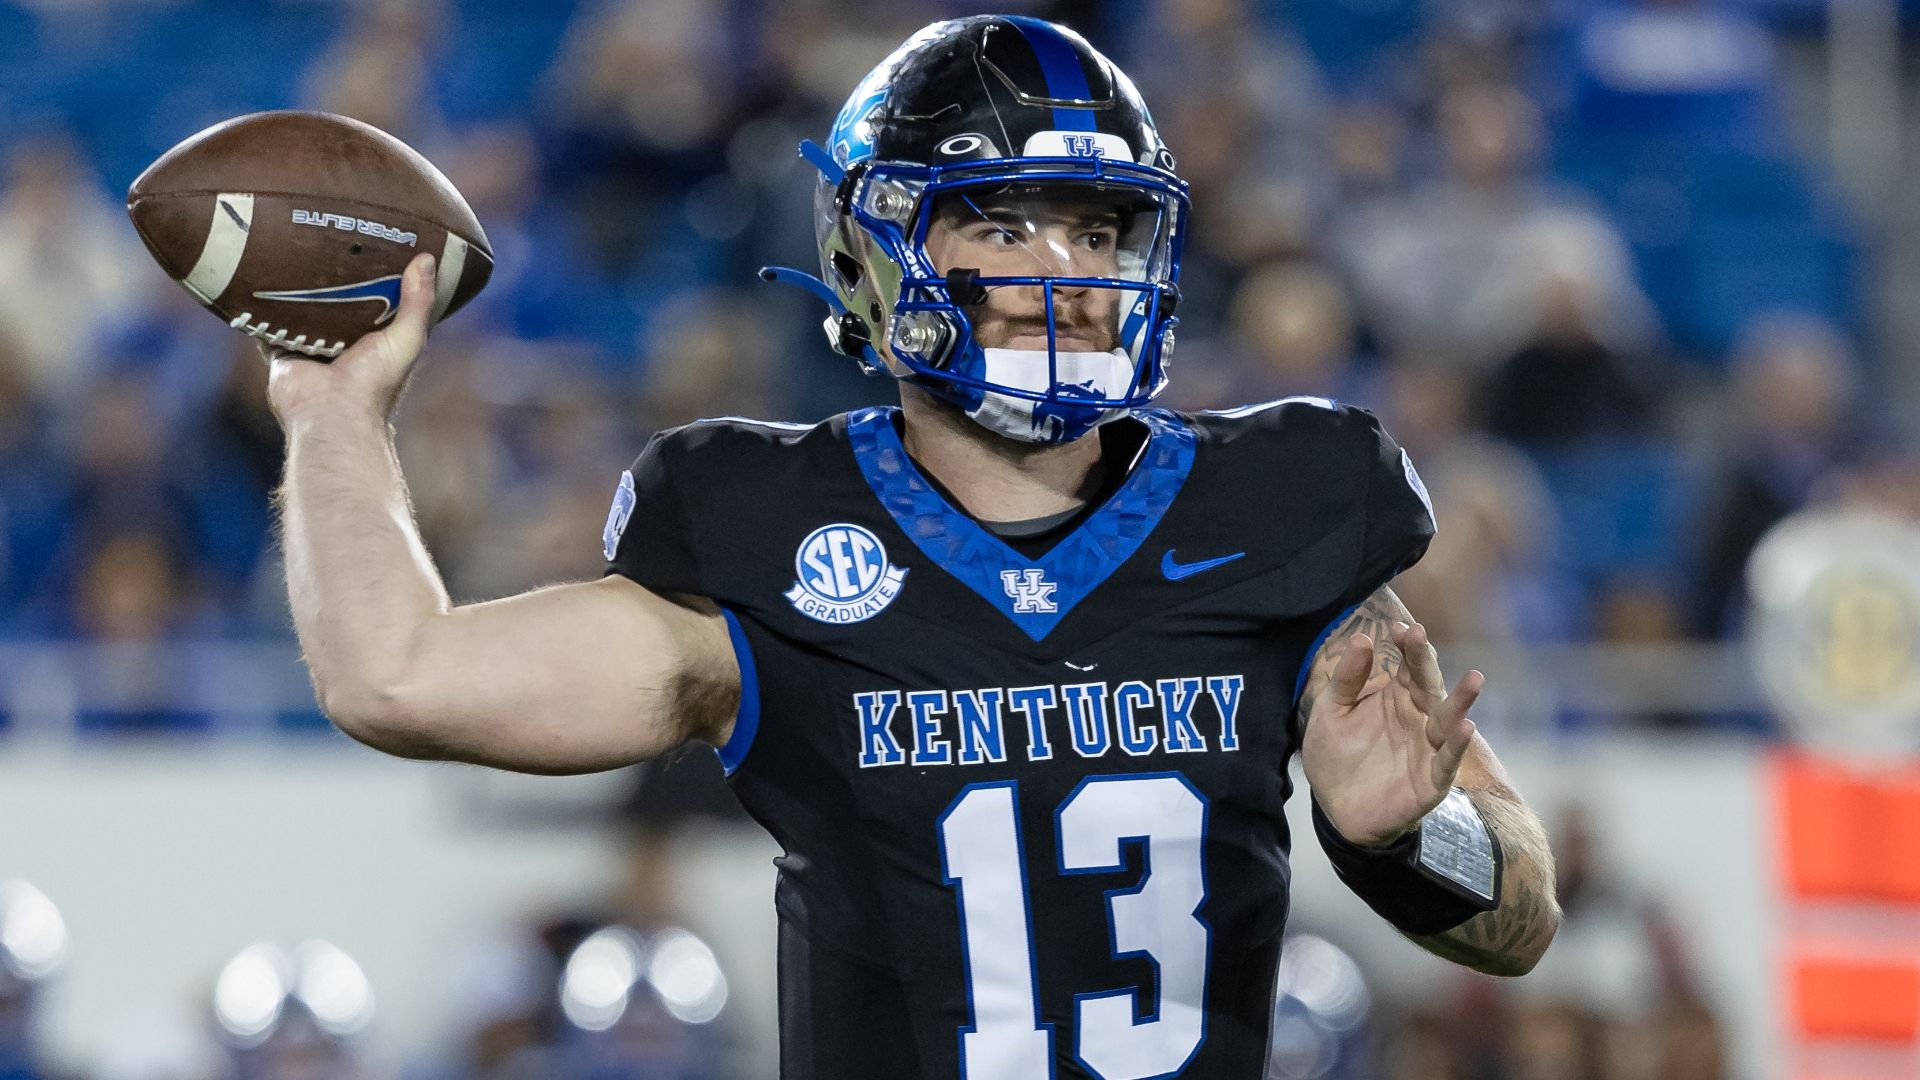 UK's Leary looks to continue upward trend vs. MS State